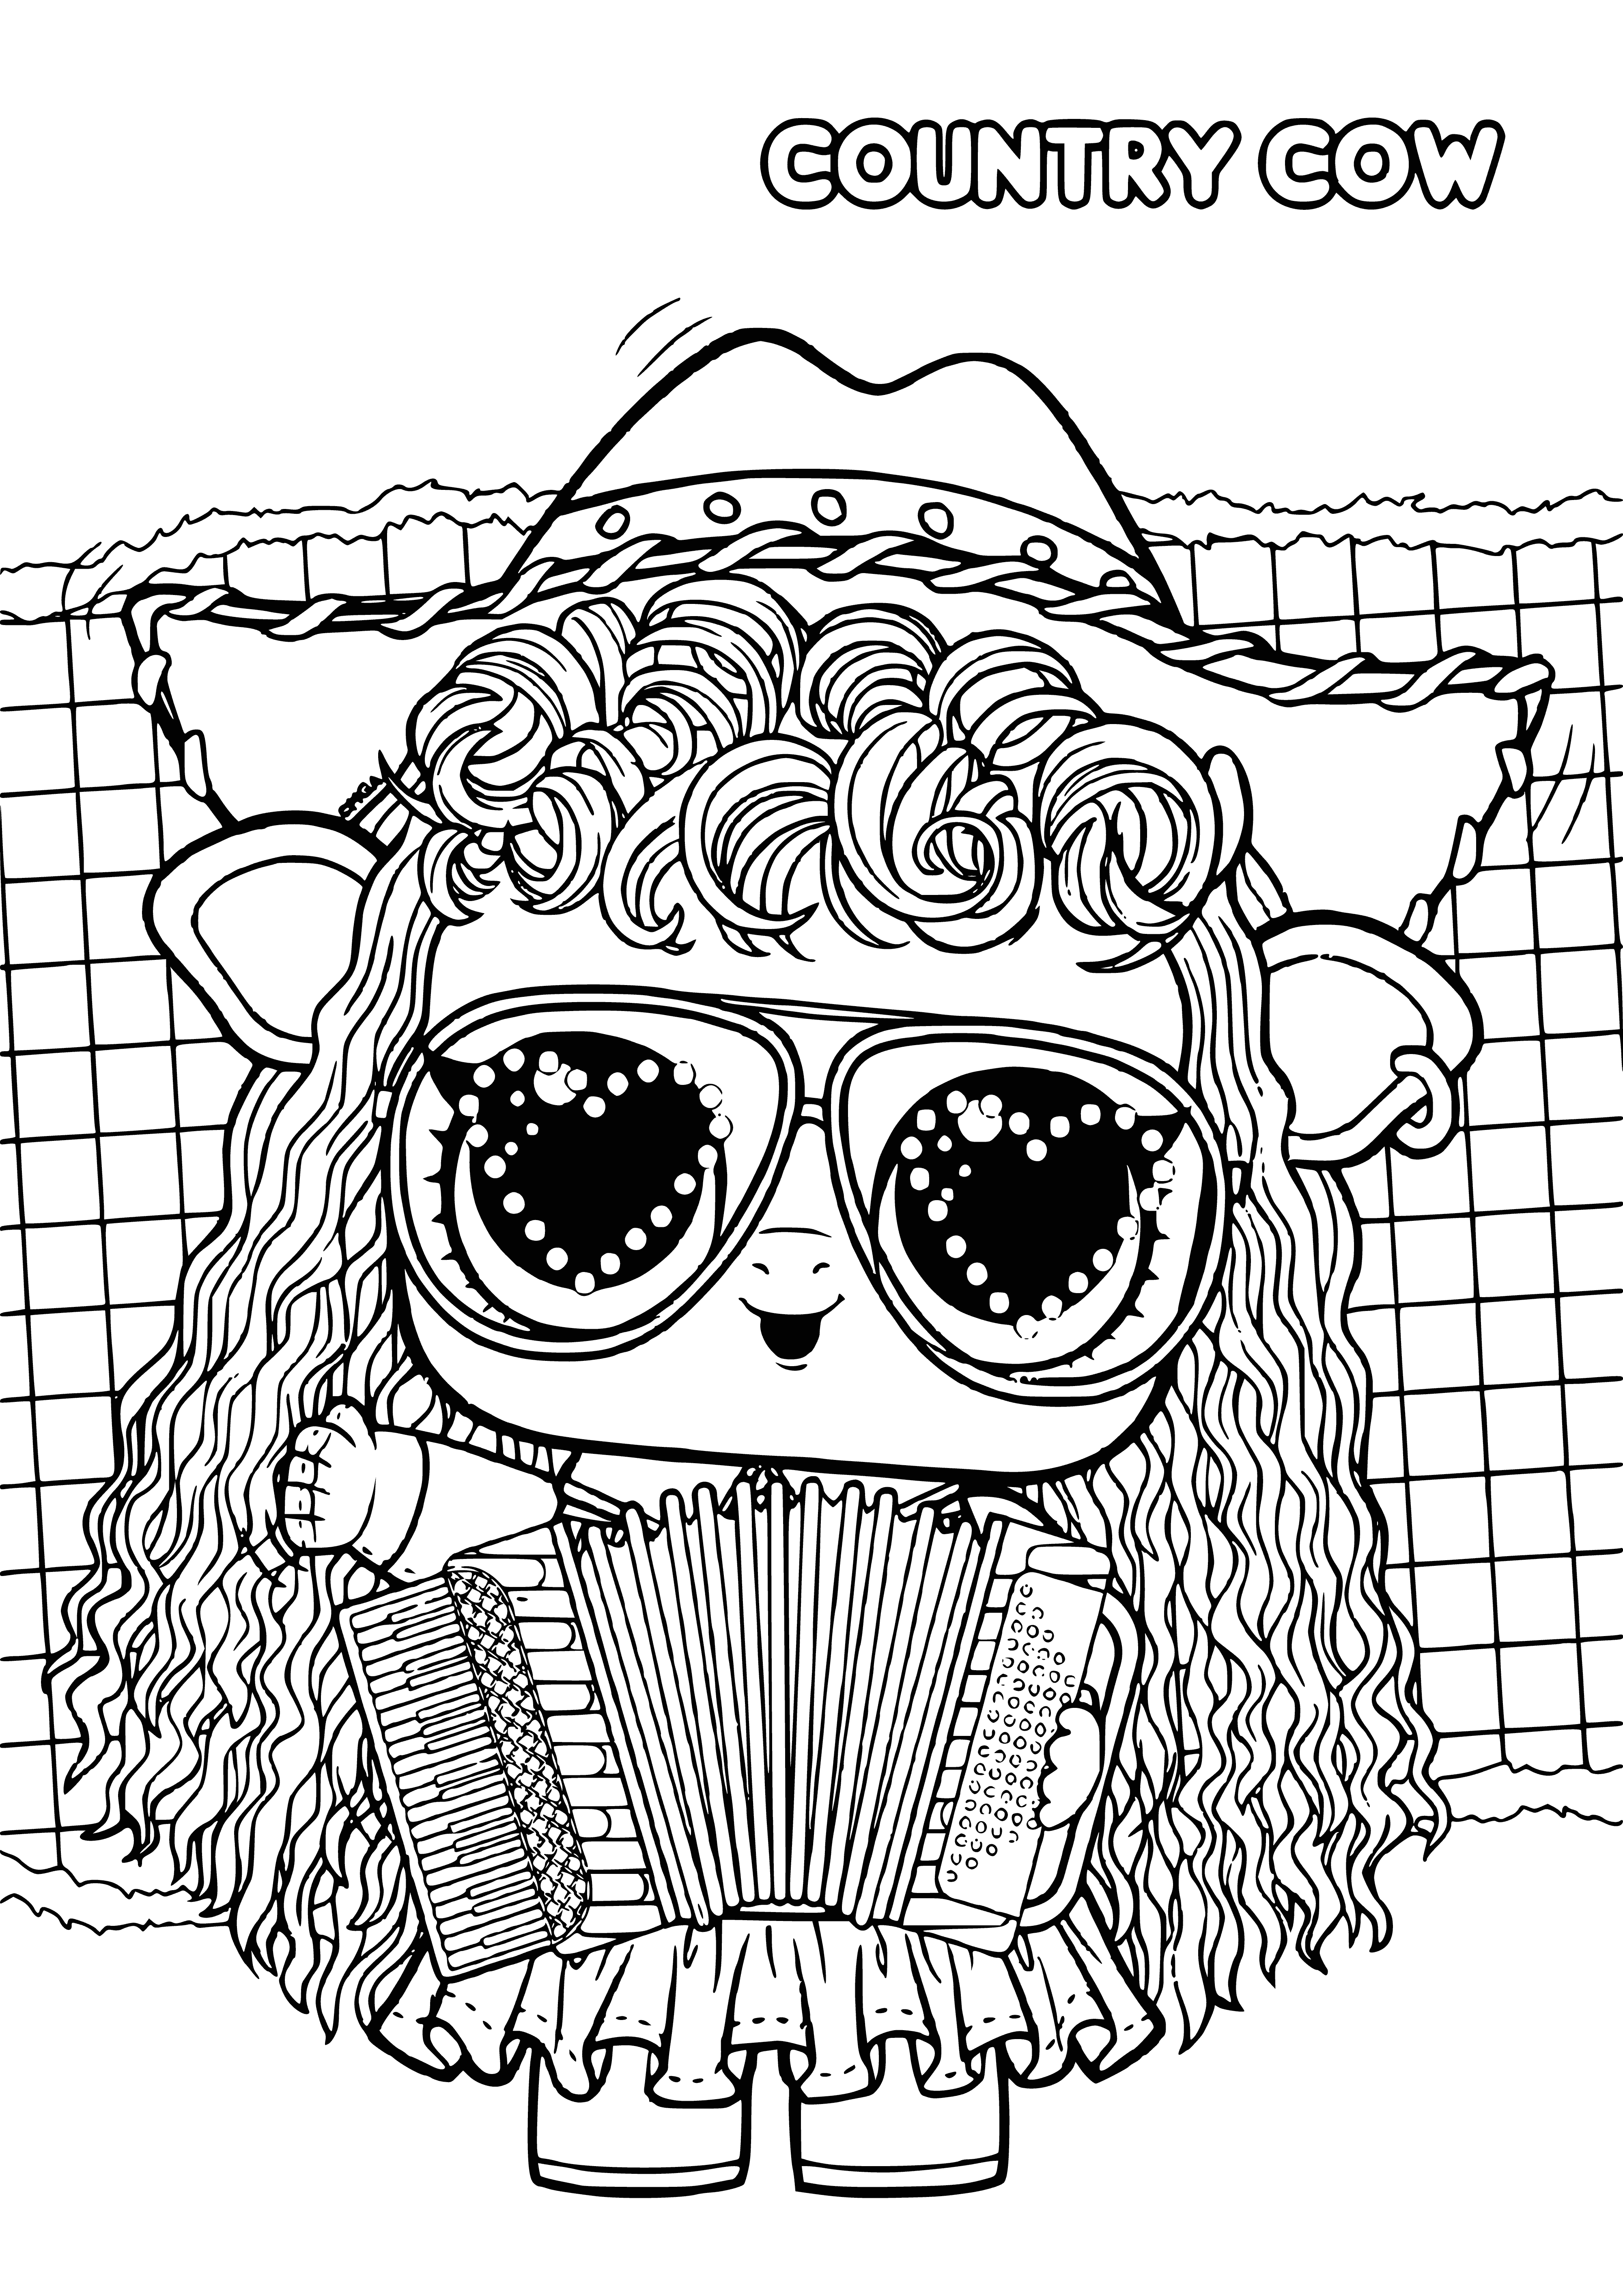 LOL pet Country Cow coloring page